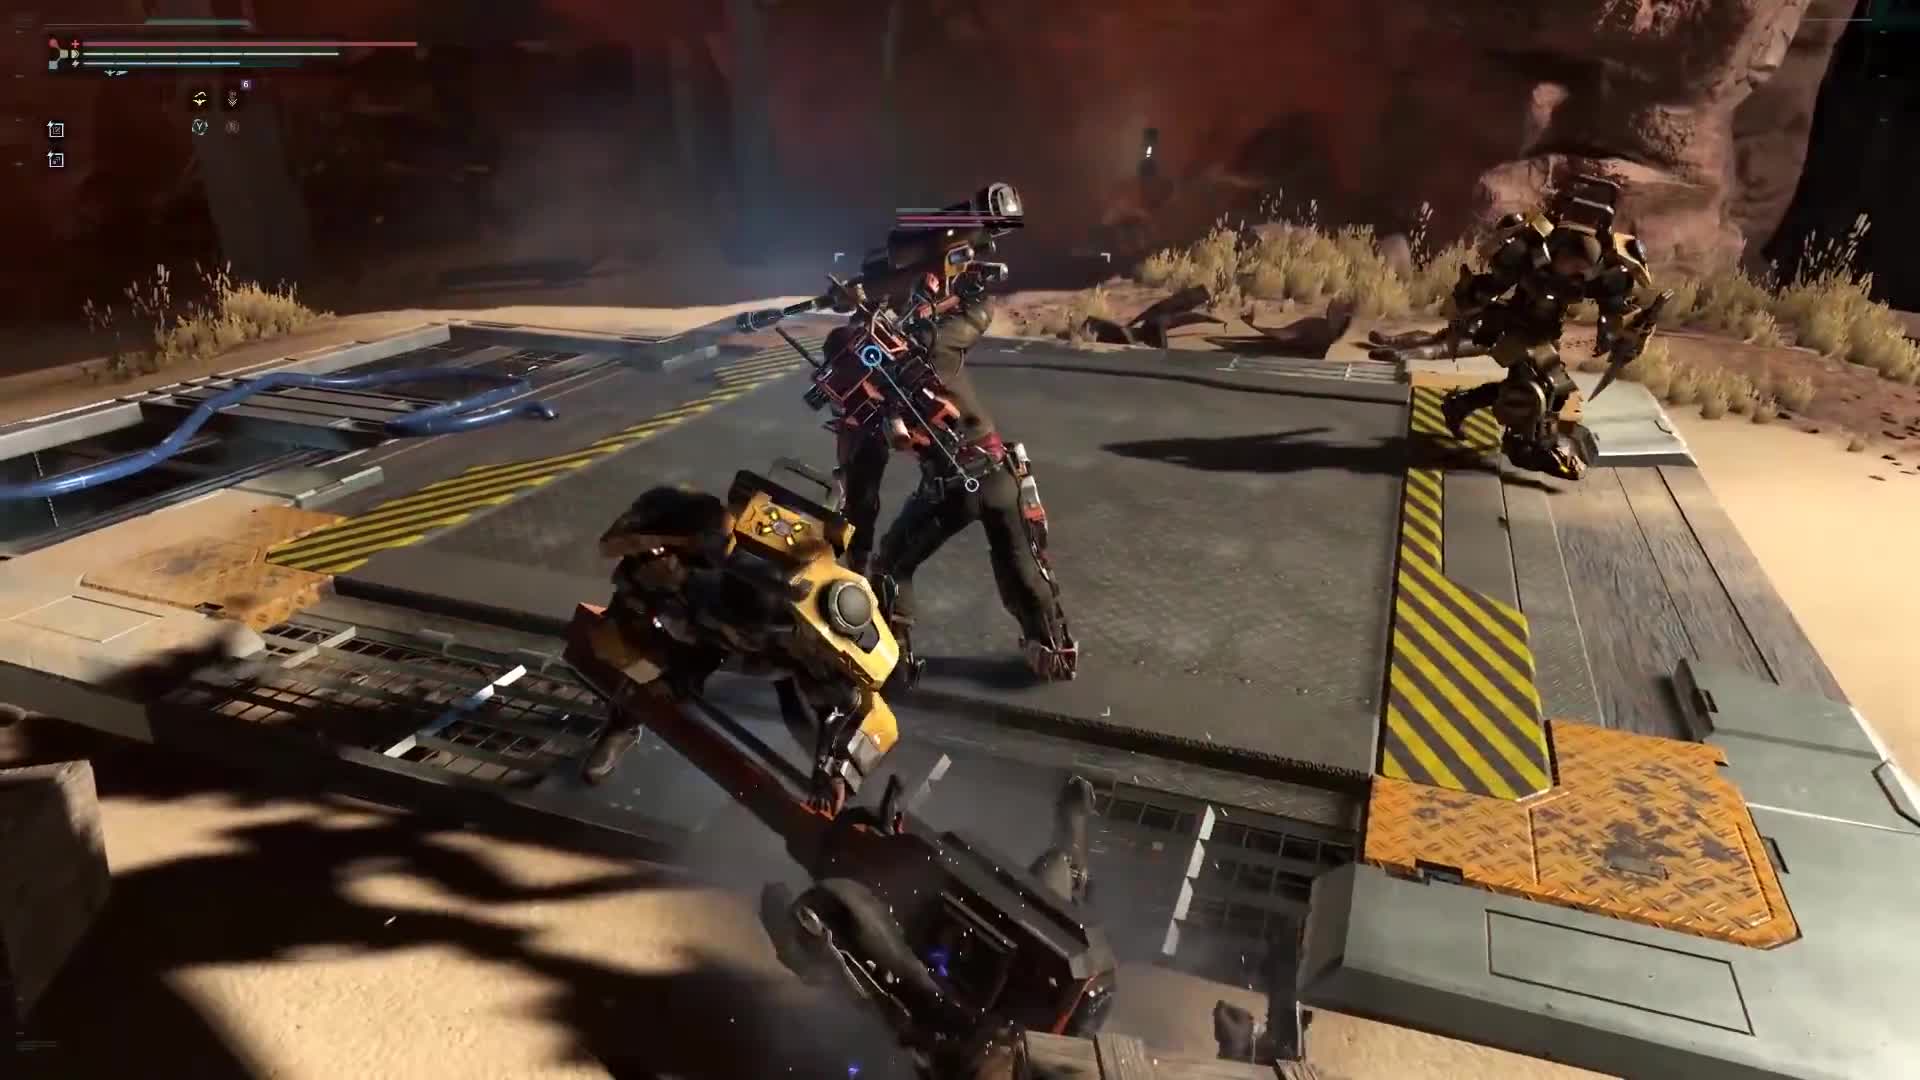 The Surge: The Good, the Bad, and the Augmented - Launch Trailer